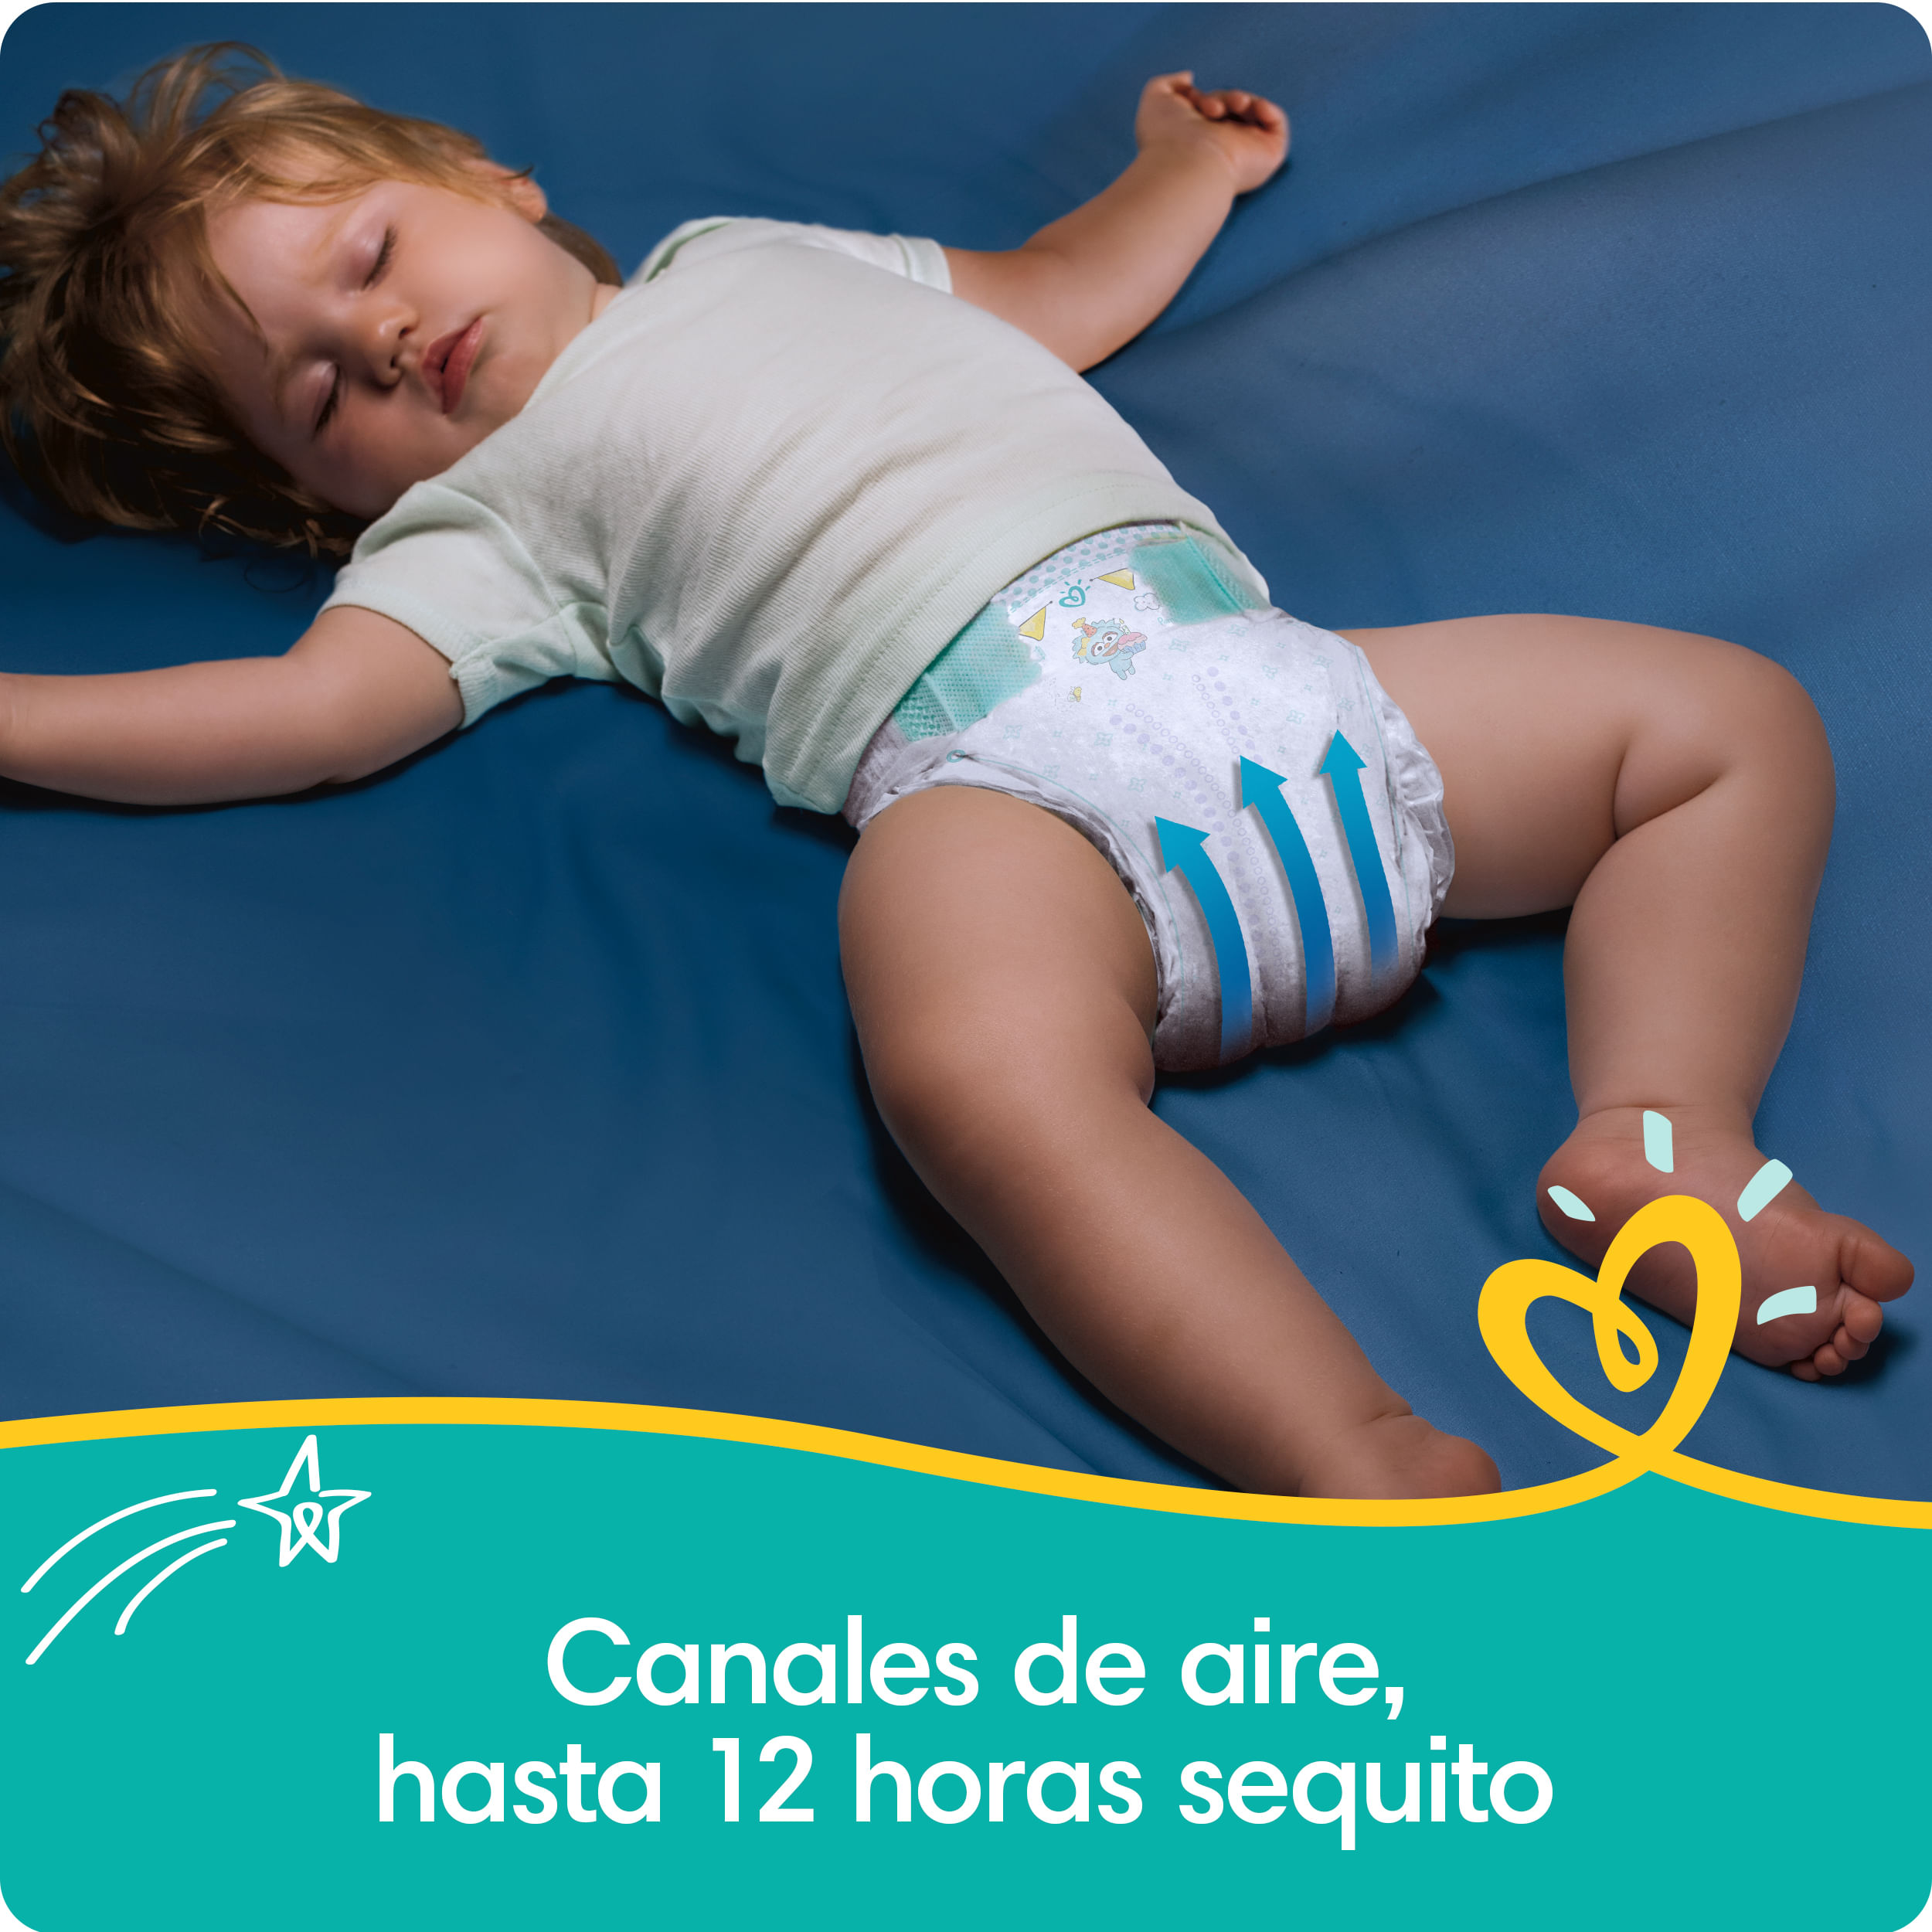 Pampers Pañal Baby Dry 28 Unidad Talla 4 – Babycenter